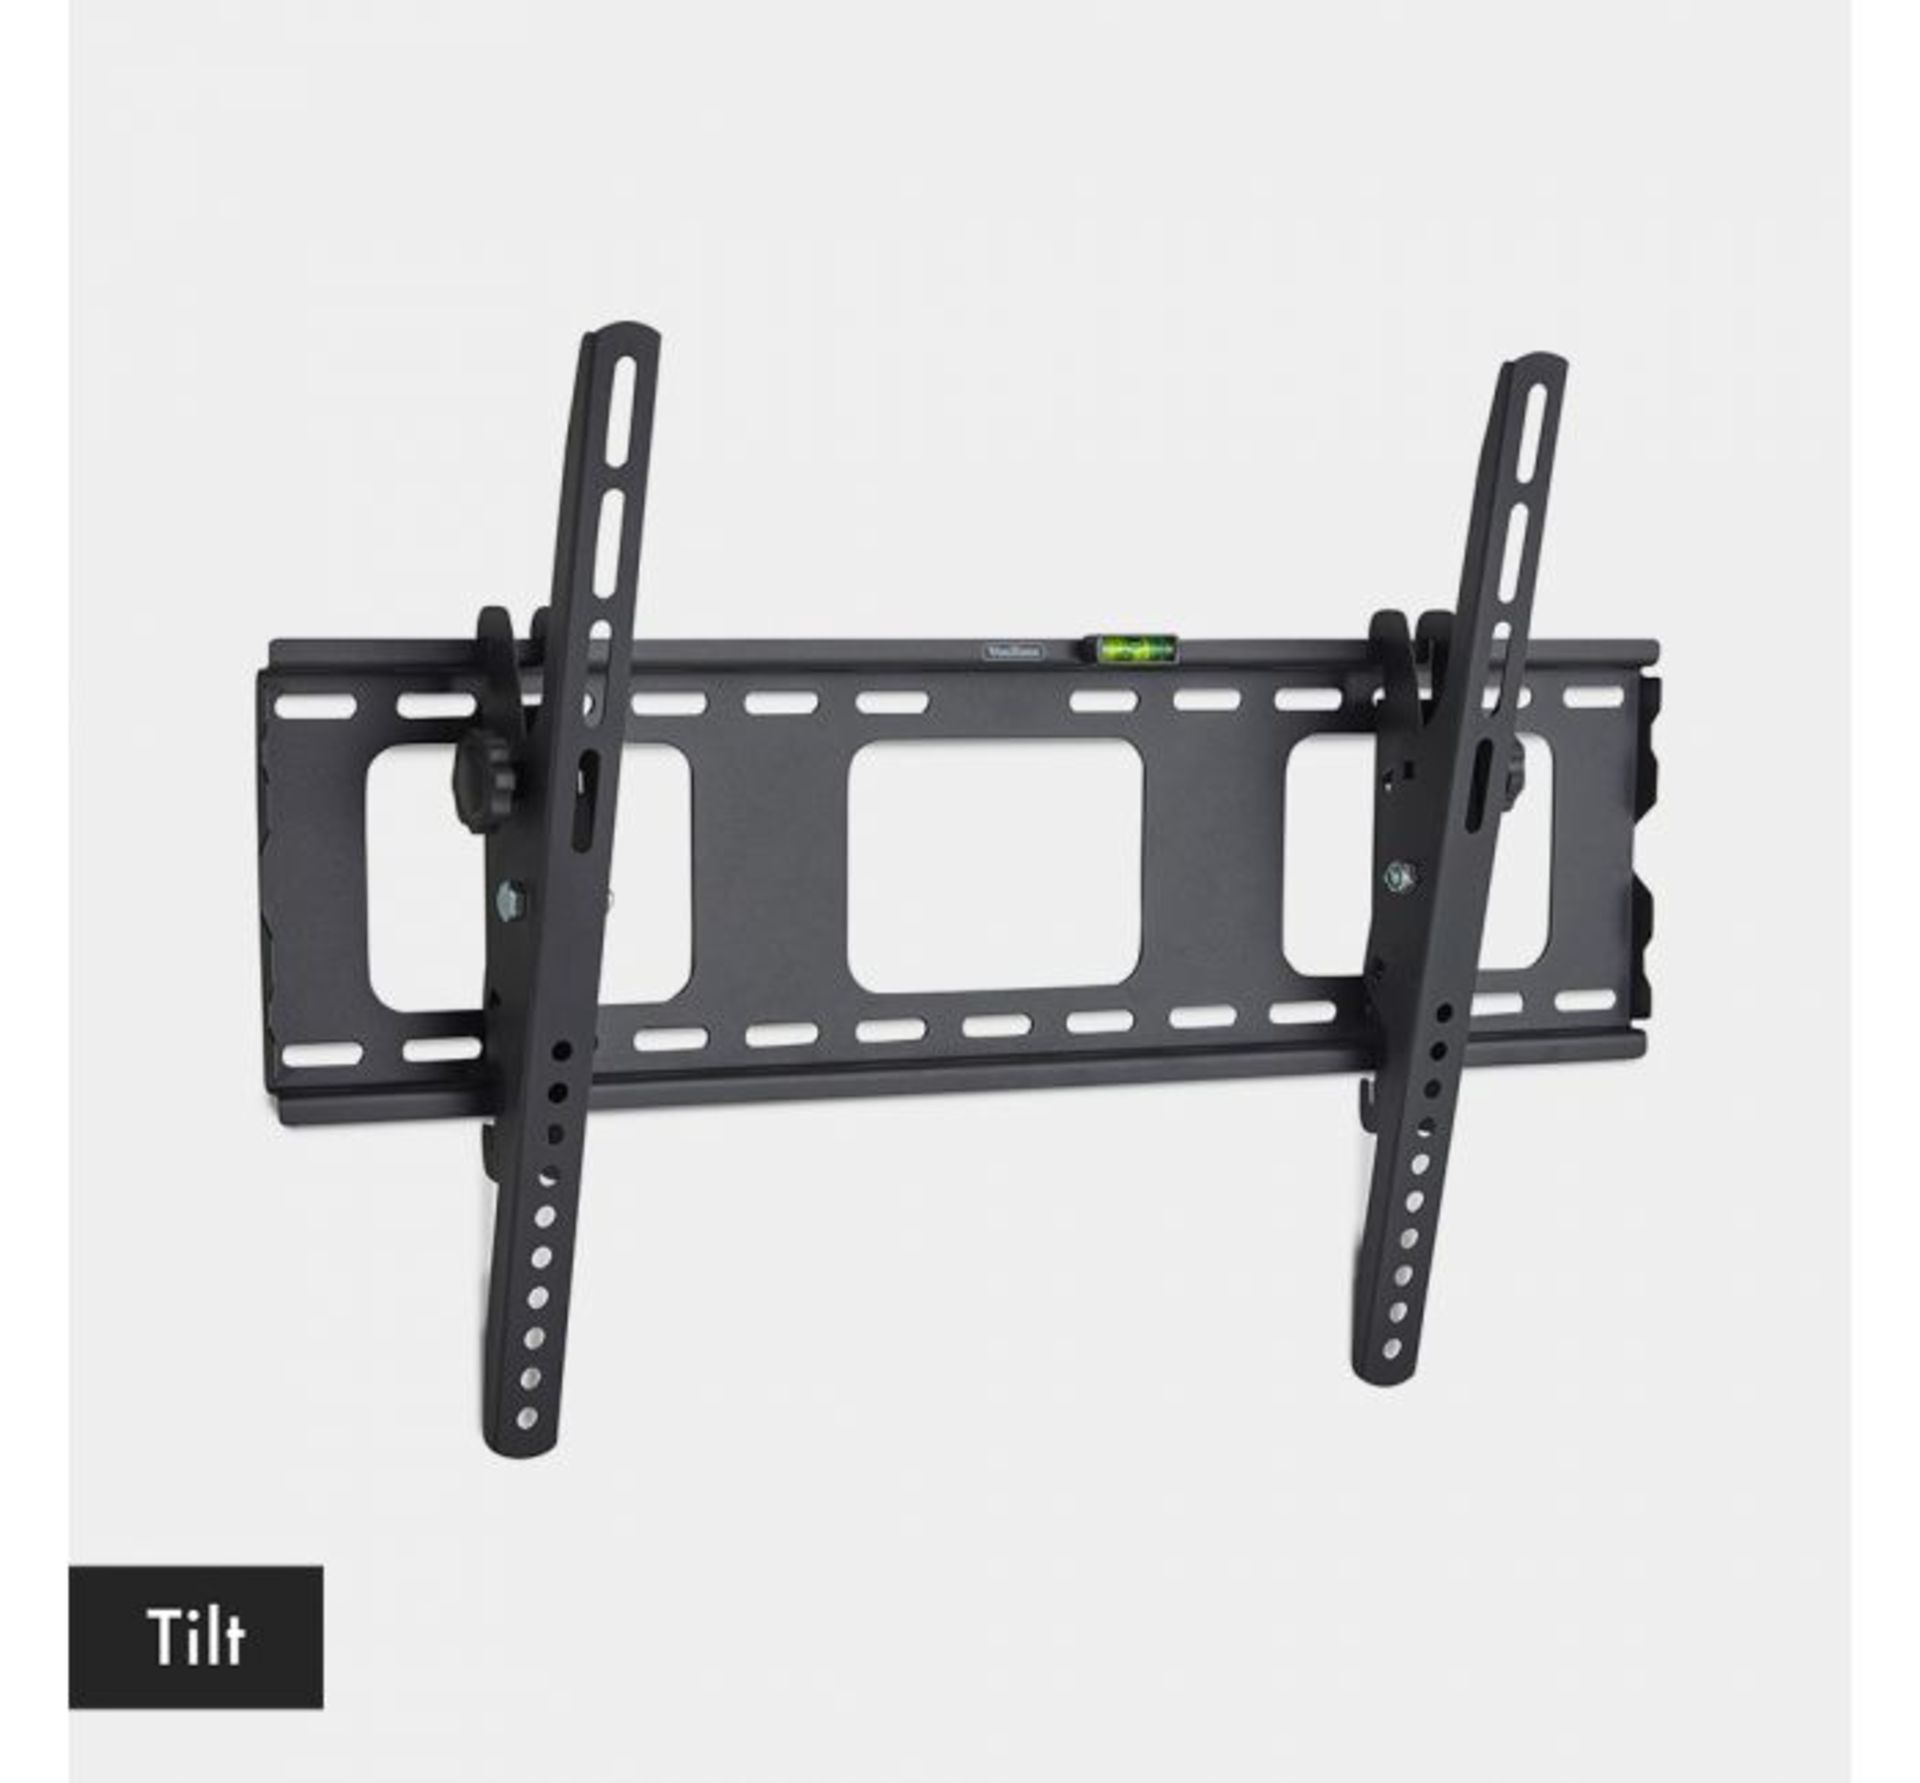 (AP223) 32-70 inch Tilt TV bracket Please confirm your TV’s VESA Mounting Dimensions and Scr... - Image 2 of 2